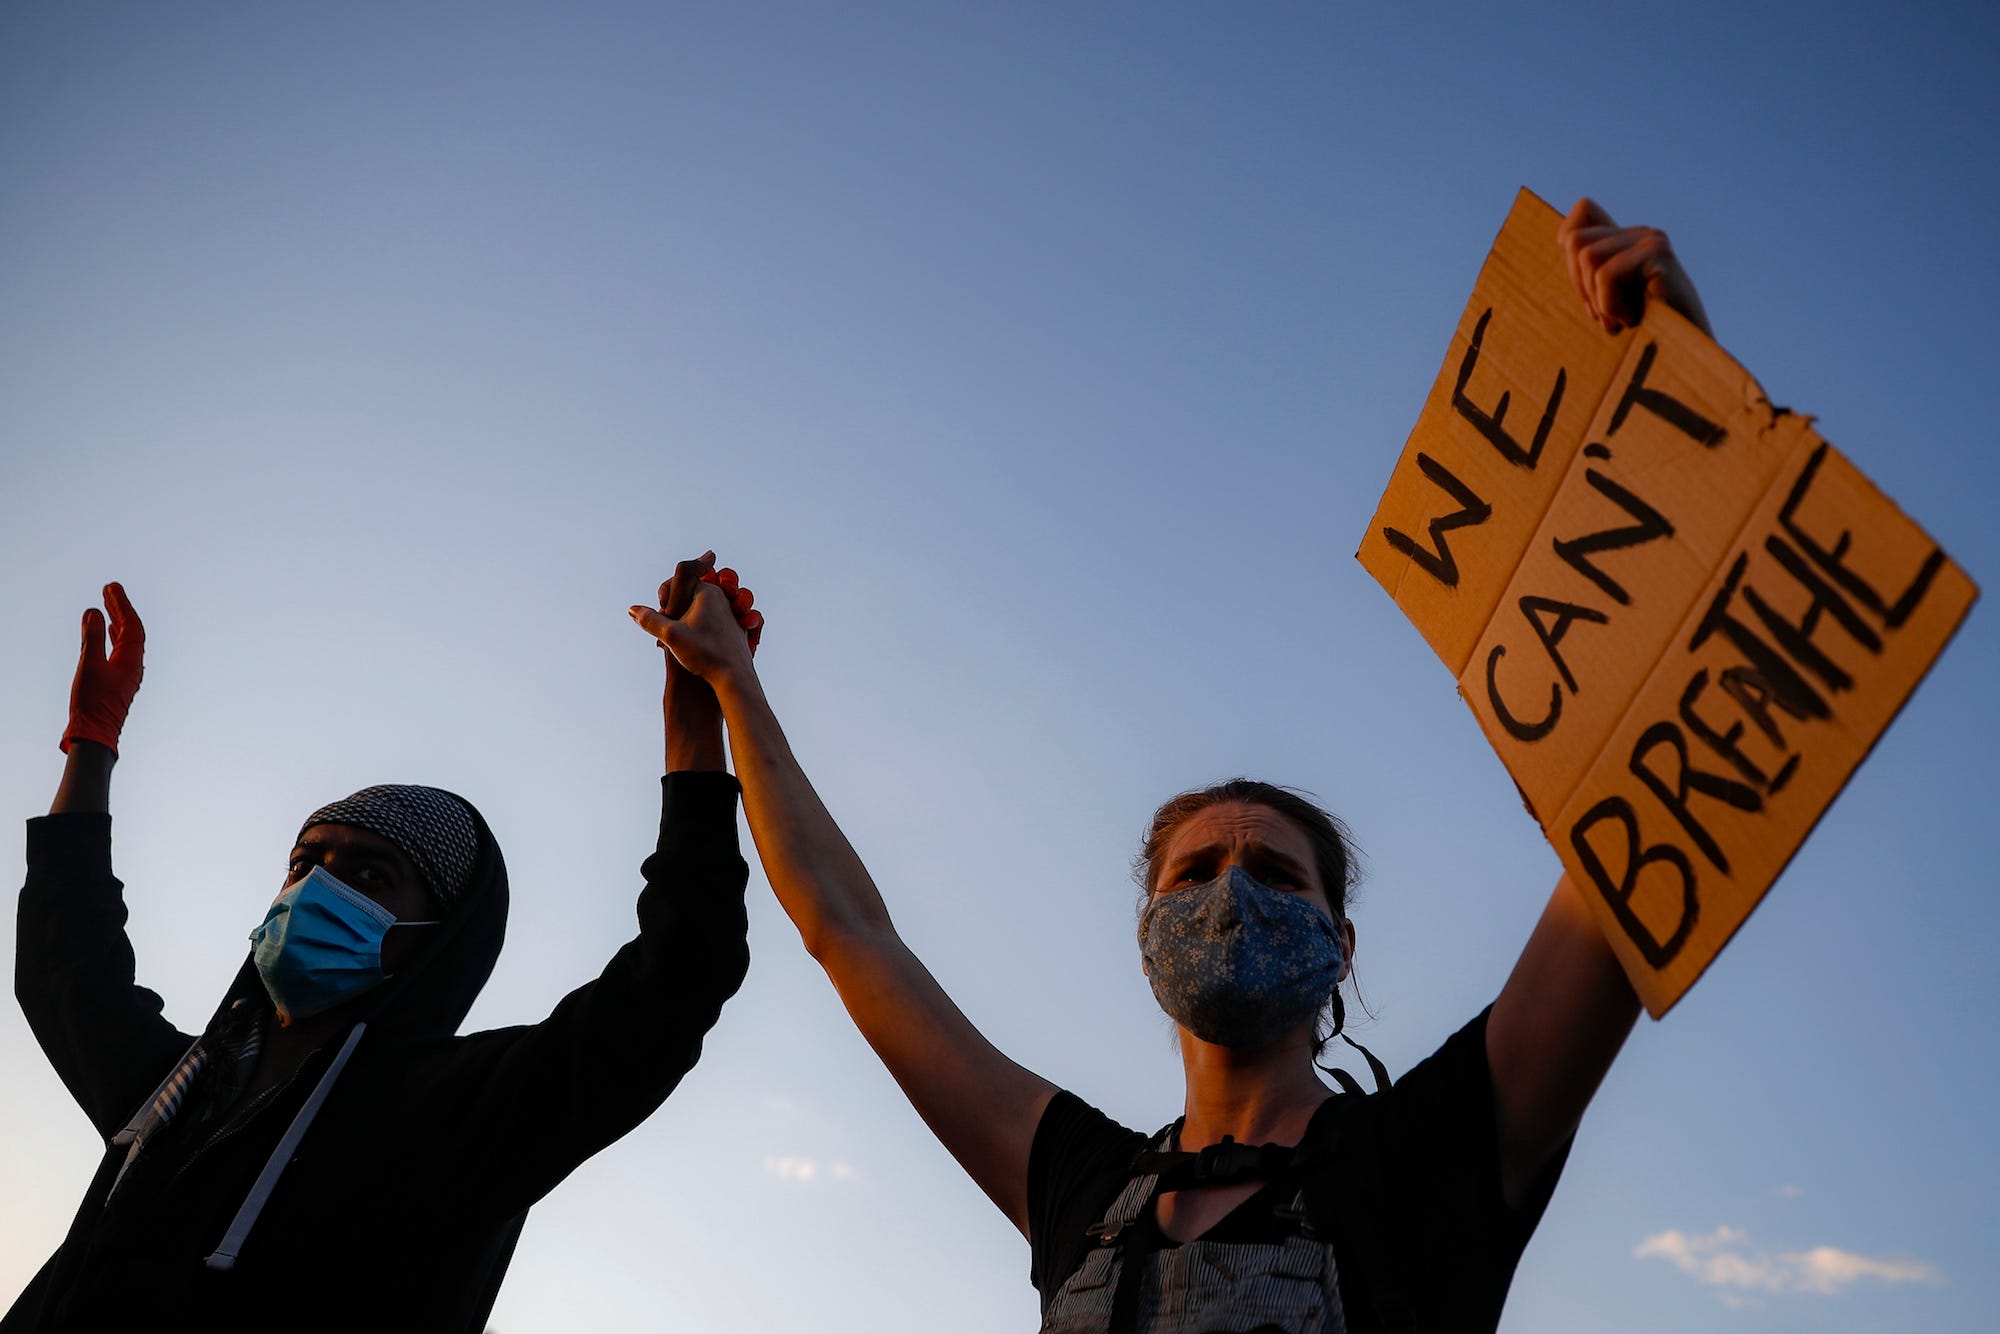 Protestors demonstrate in St. Paul, Minnesota while holding a "WE CAN'T BREATHE" sign, on May 28, 2020.